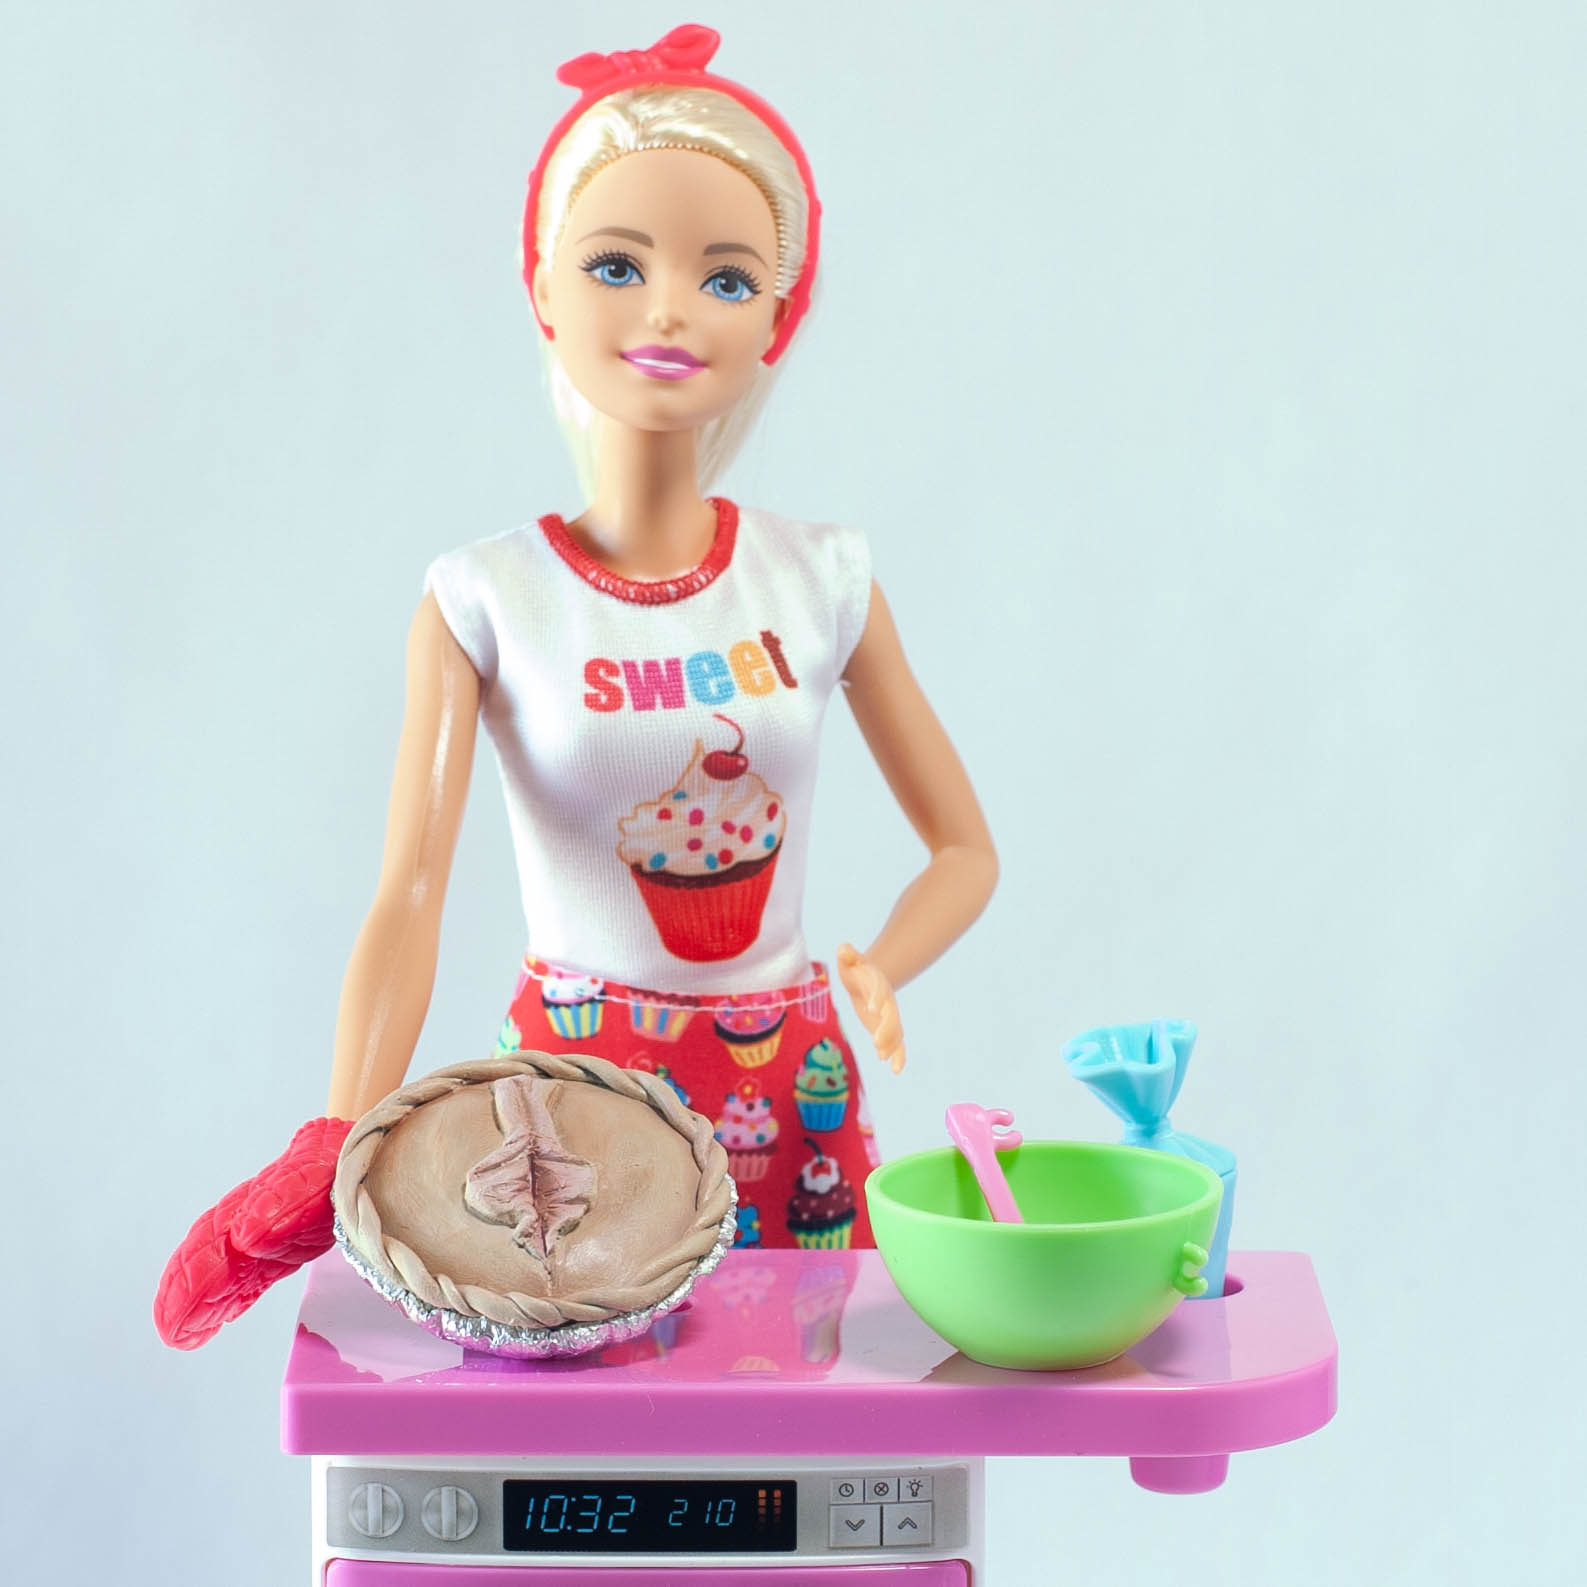 Baking Barbie from the waist up. Barbie is wearing a white t-shirt with a cupcake on it, standing behind a Barbie oven and countertop. On the counter is a vulva pie, mixing bowl, and piping bag. 